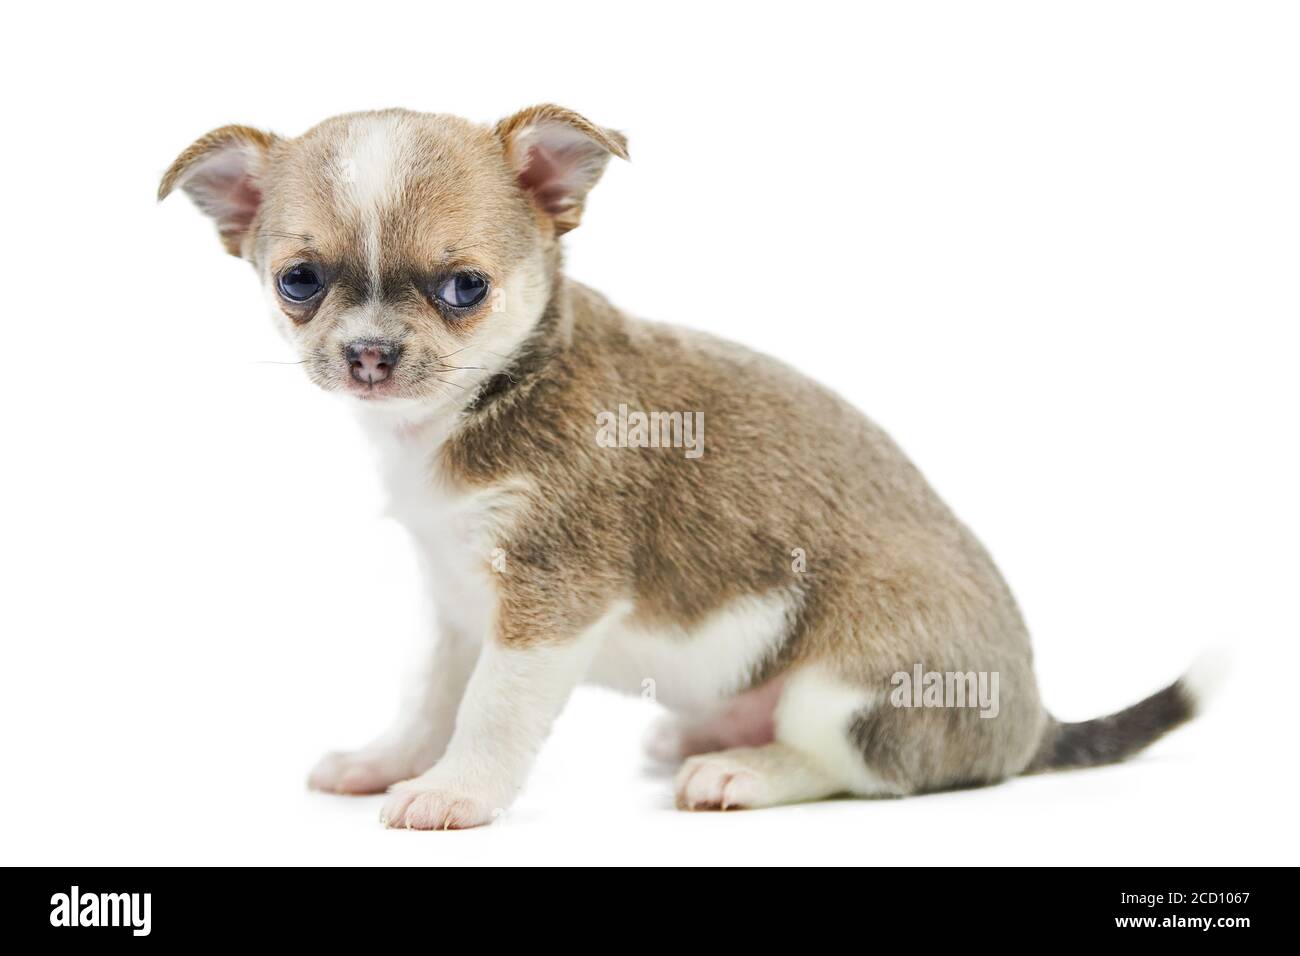 Chihuahua puppies, isolated. Little cute dog on white background. Dog shelter puppy. Small short haired chihuahua dog breed, studio shoot. Stock Photo